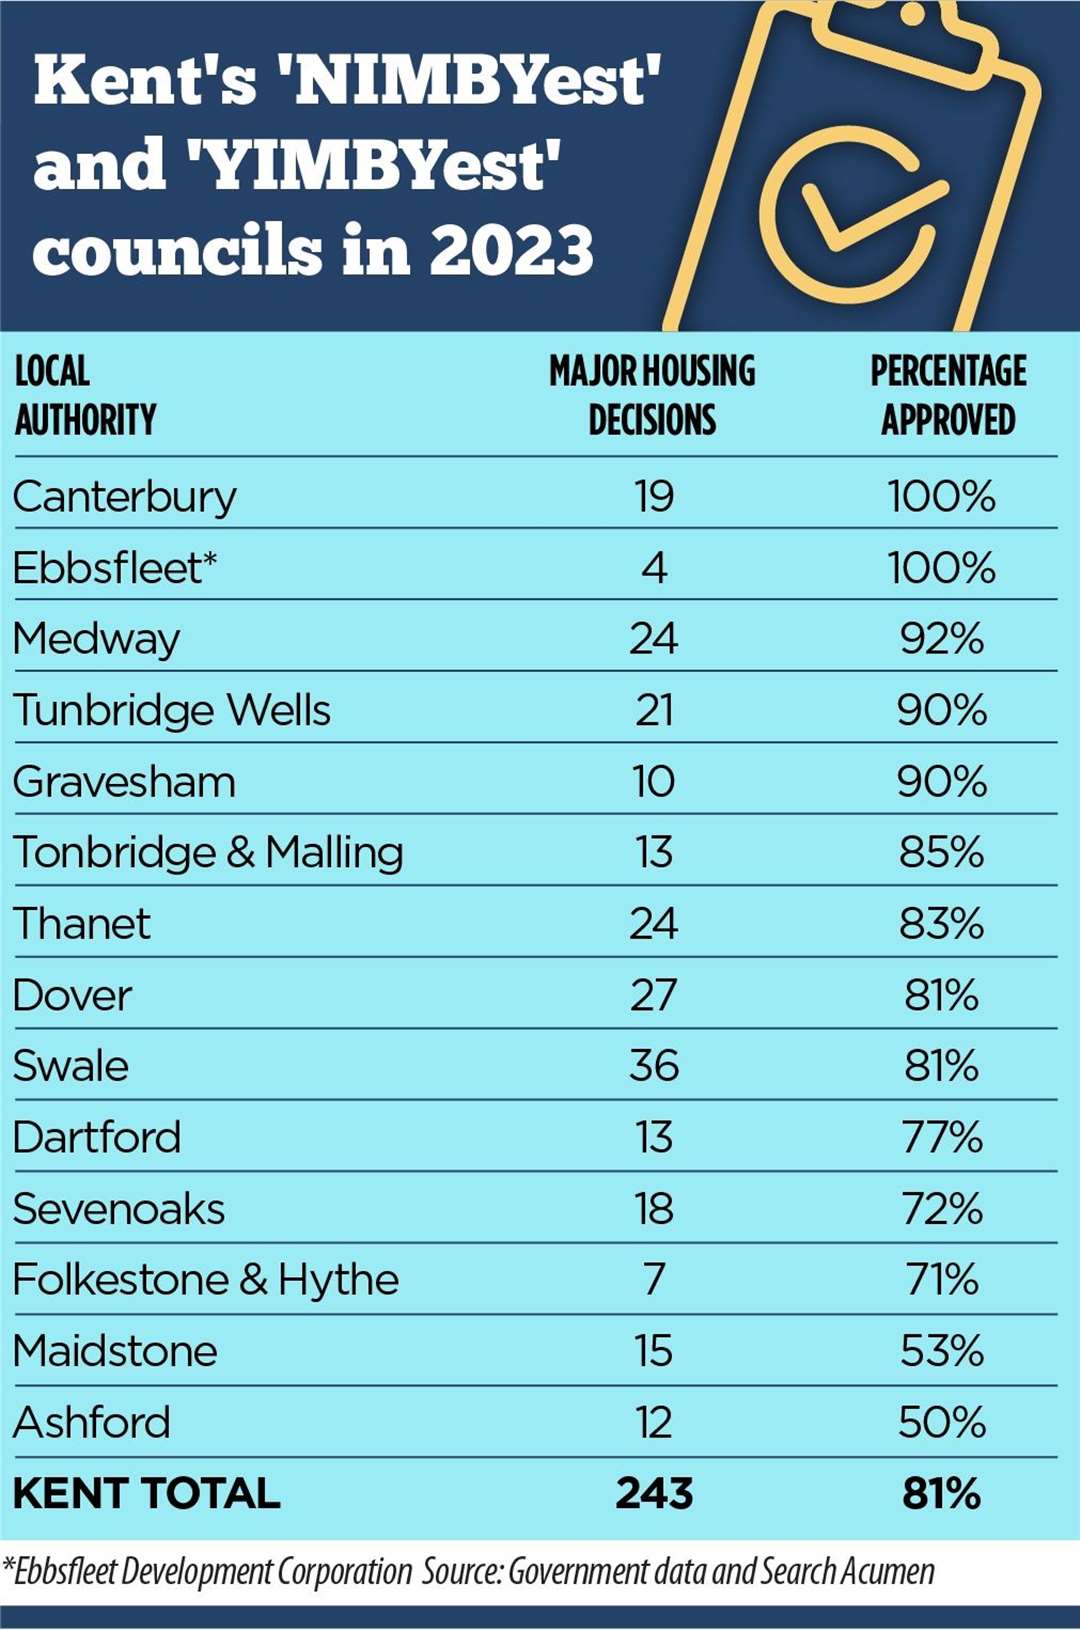 Kent's councils by percentage of major housing applications approved